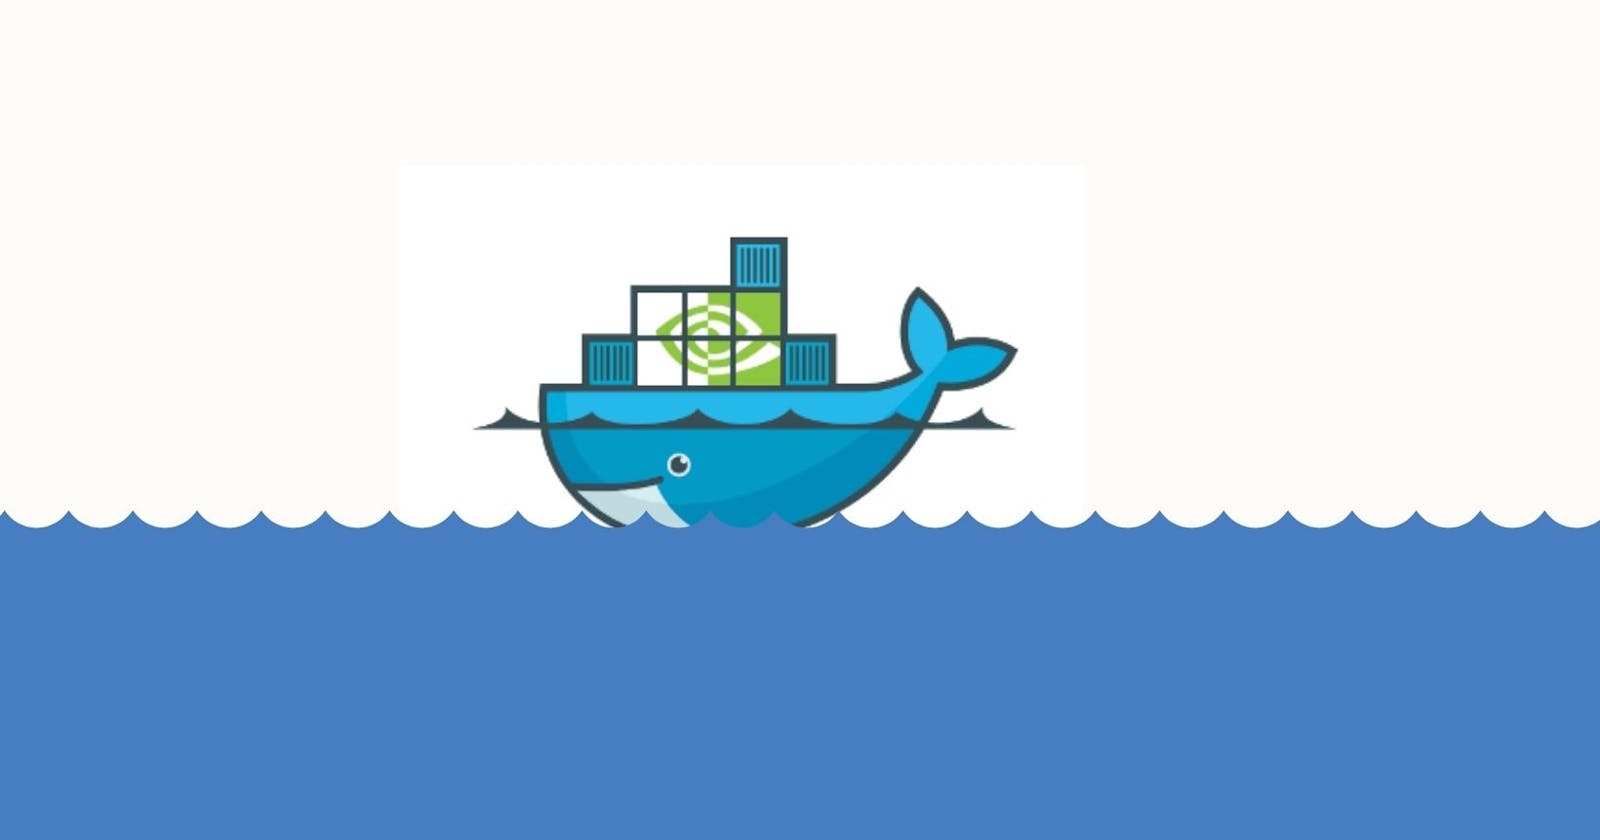 A complete guide to building a Docker Image serving a Machine learning system in Production